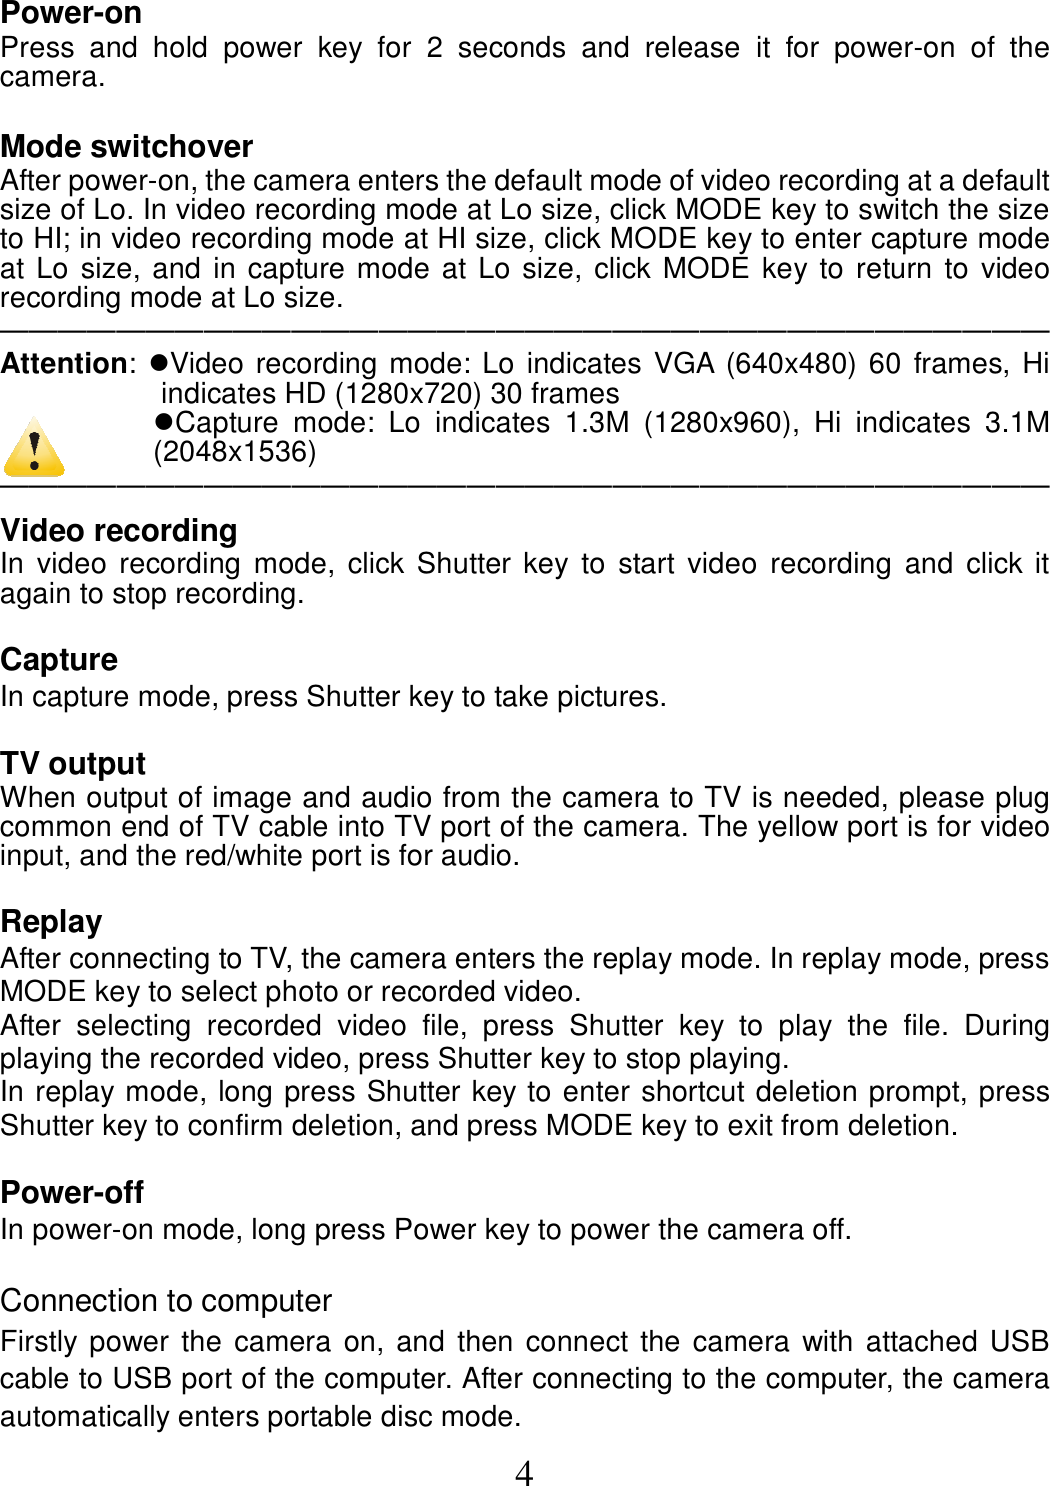  4 Power-on Press  and  hold  power  key  for  2  seconds  and  release  it  for  power-on  of  the camera.     Mode switchover After power-on, the camera enters the default mode of video recording at a default size of Lo. In video recording mode at Lo size, click MODE key to switch the size to HI; in video recording mode at HI size, click MODE key to enter capture mode at Lo size, and in capture mode at Lo size, click MODE key to return to video recording mode at Lo size.   ──────────────────────────────────── Attention: Video recording mode: Lo indicates VGA (640x480) 60 frames, Hi indicates HD (1280x720) 30 frames Capture  mode:  Lo  indicates  1.3M  (1280x960),  Hi  indicates  3.1M (2048x1536) ──────────────────────────────────── Video recording   In  video recording  mode, click  Shutter  key to  start video  recording  and  click it again to stop recording.  Capture In capture mode, press Shutter key to take pictures.  TV output When output of image and audio from the camera to TV is needed, please plug common end of TV cable into TV port of the camera. The yellow port is for video input, and the red/white port is for audio.    Replay After connecting to TV, the camera enters the replay mode. In replay mode, press MODE key to select photo or recorded video. After  selecting  recorded  video  file,  press  Shutter  key  to  play  the  file.  During playing the recorded video, press Shutter key to stop playing.   In replay mode, long press Shutter key to enter shortcut deletion prompt, press Shutter key to confirm deletion, and press MODE key to exit from deletion.      Power-off In power-on mode, long press Power key to power the camera off.  Connection to computer Firstly power the camera on, and then connect the camera with attached USB cable to USB port of the computer. After connecting to the computer, the camera automatically enters portable disc mode. 